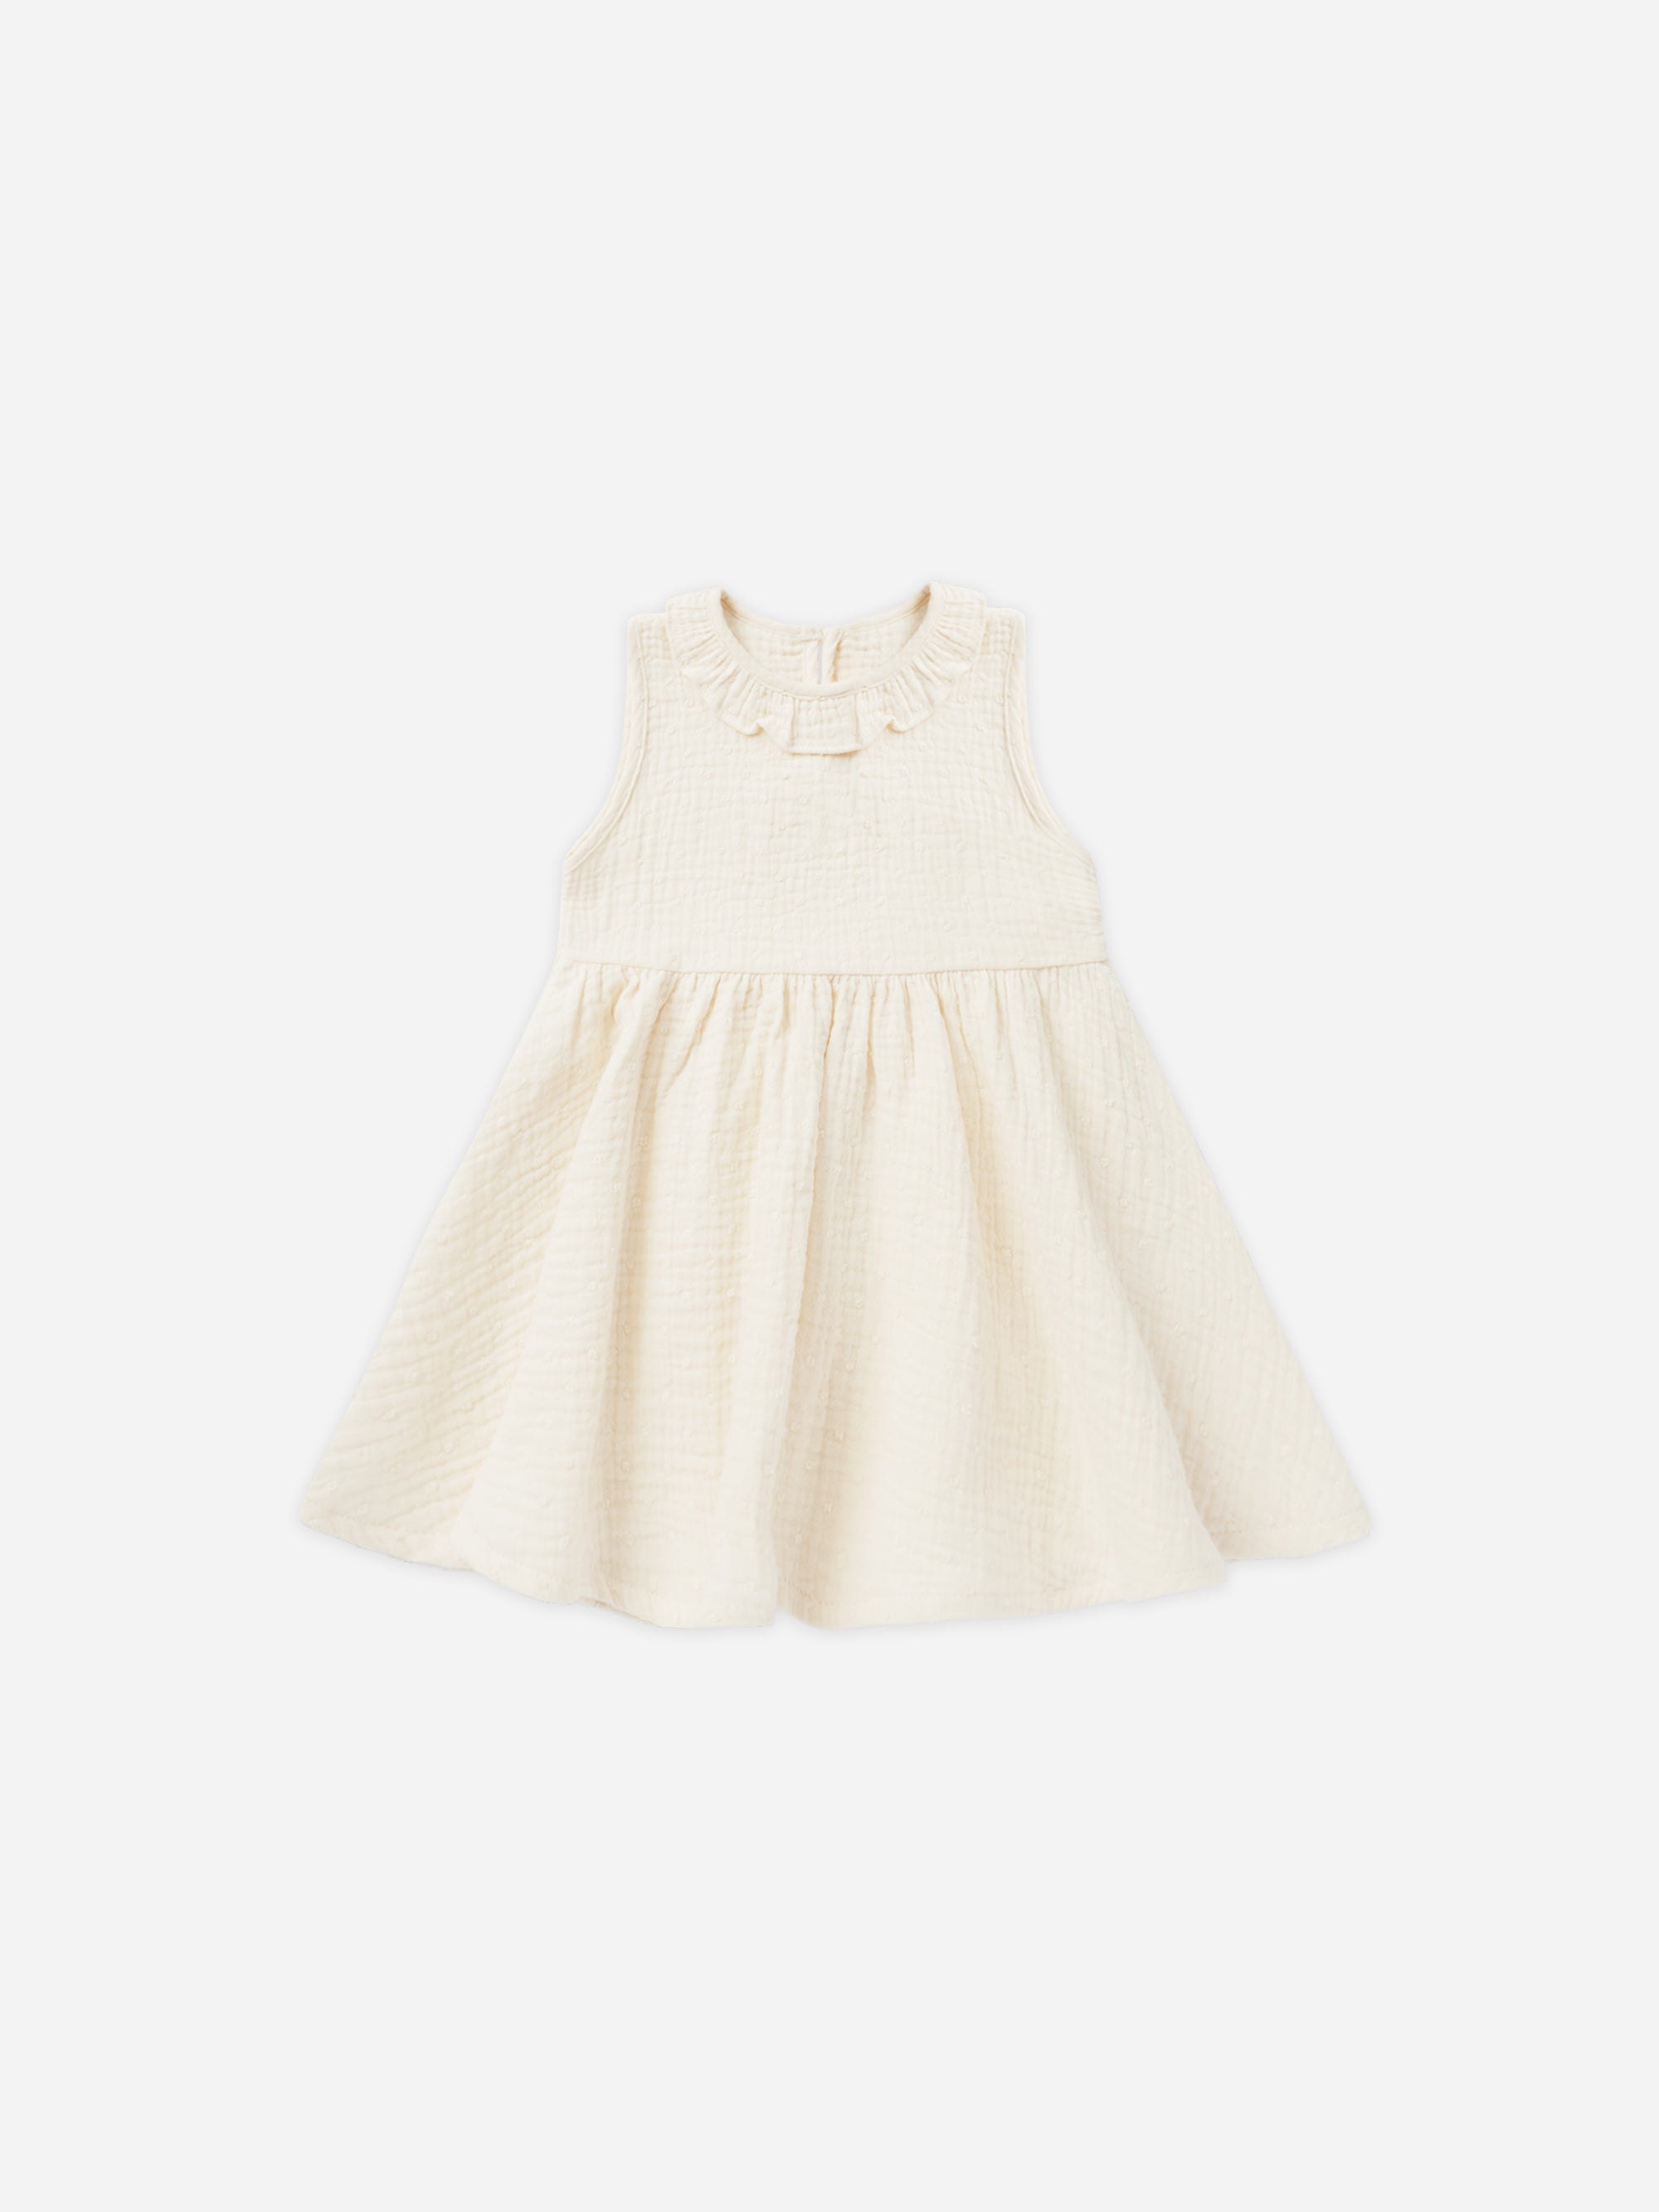 Marie Dress || Ivory - Rylee + Cru | Kids Clothes | Trendy Baby Clothes | Modern Infant Outfits |